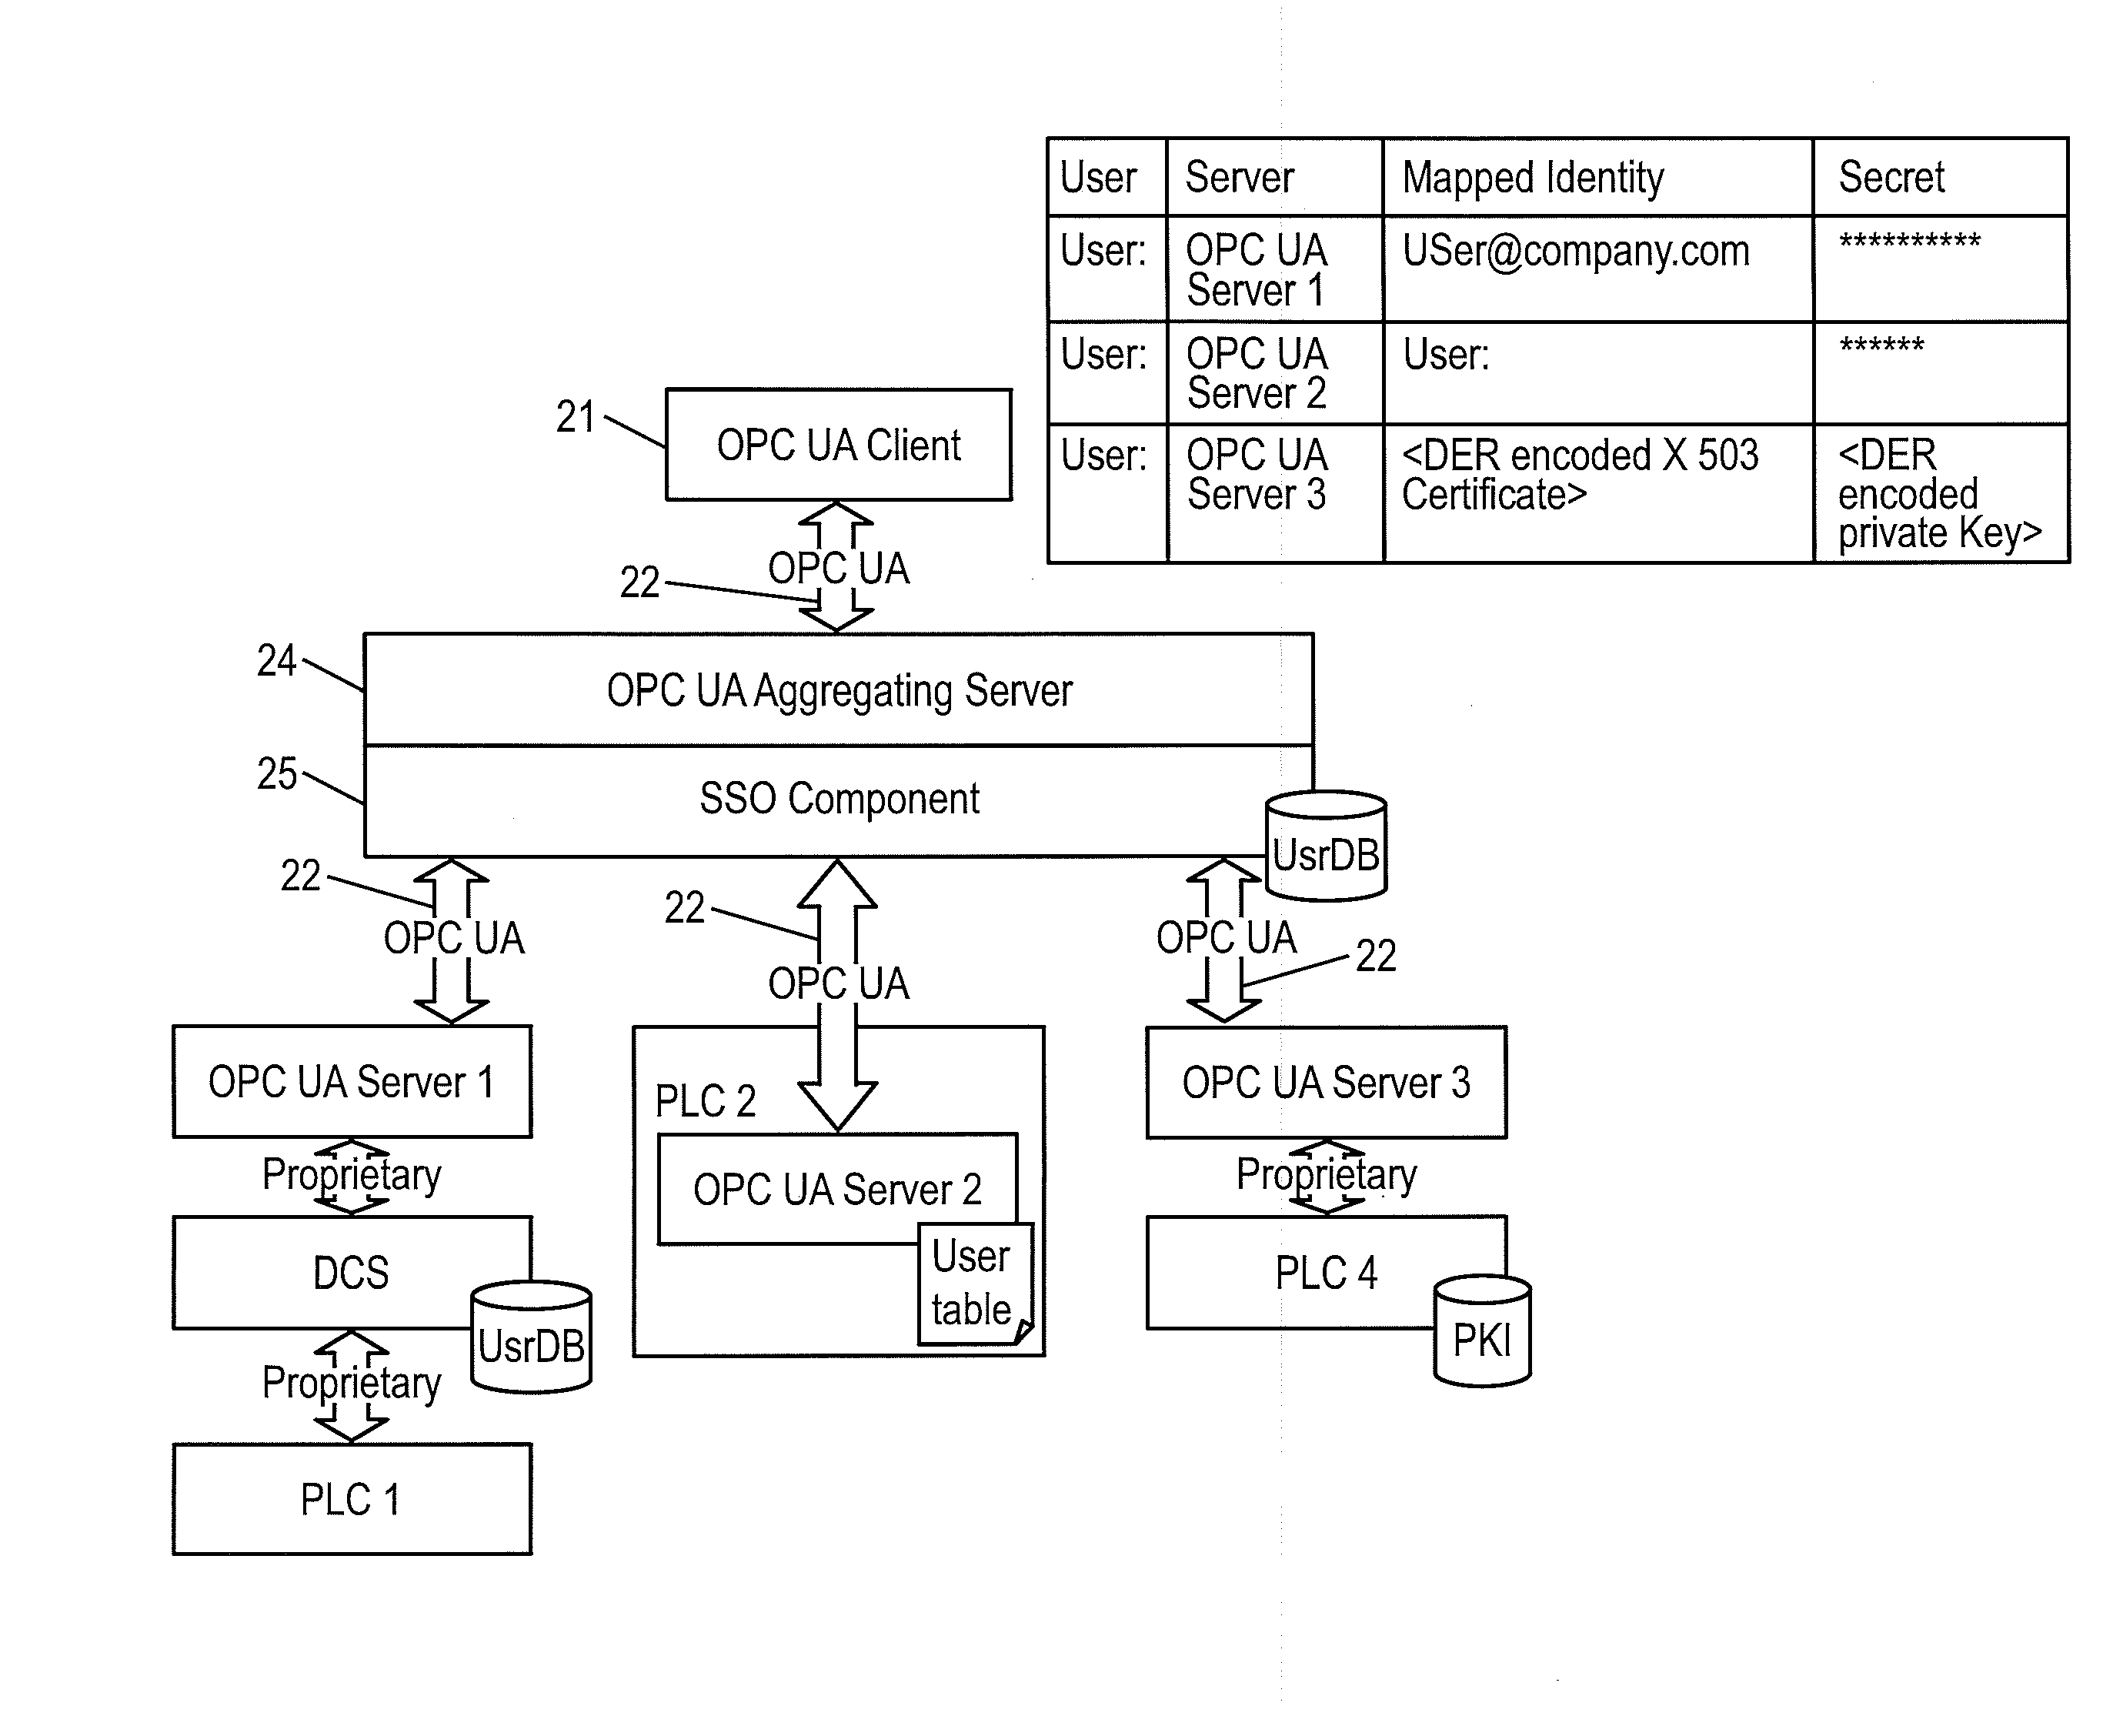 Client/server system for communicating according to the standard protocol opc ua and having single sign-on mechanisms for authenticating, and method for performing single sign-on in such a system